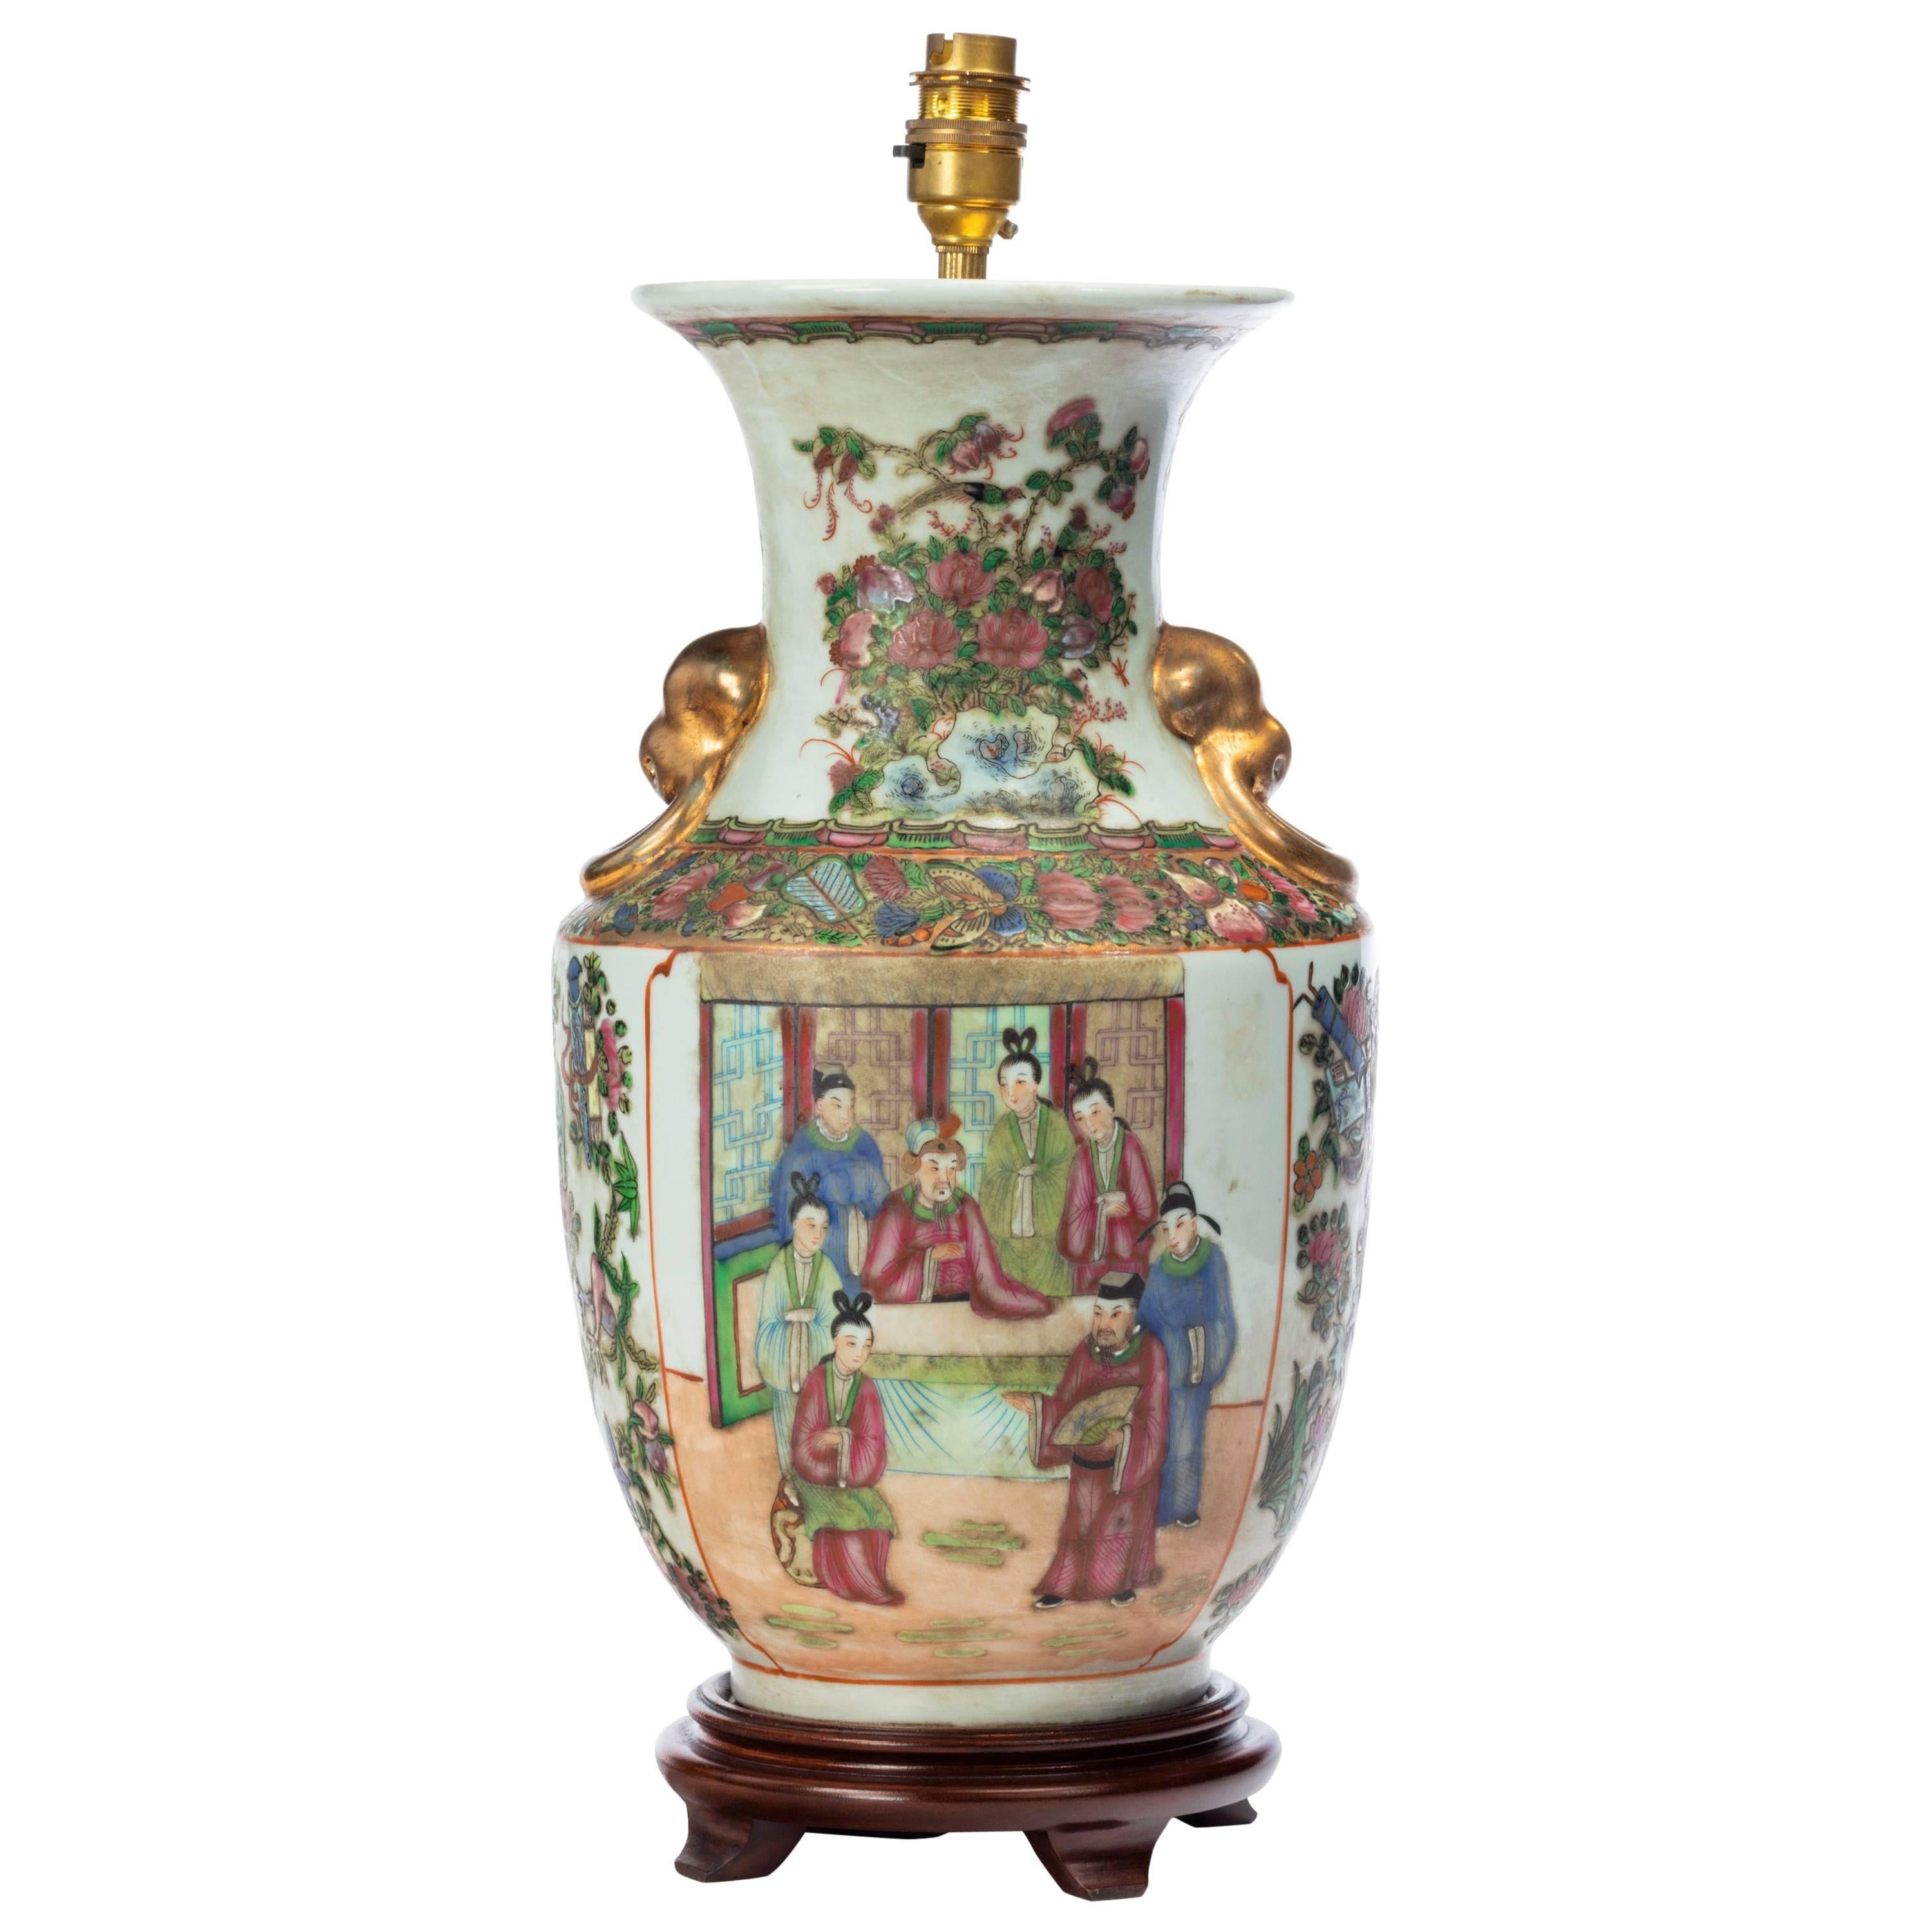 Cantonese, Porcelain Lamp with Elaborate Gilding and Decoration